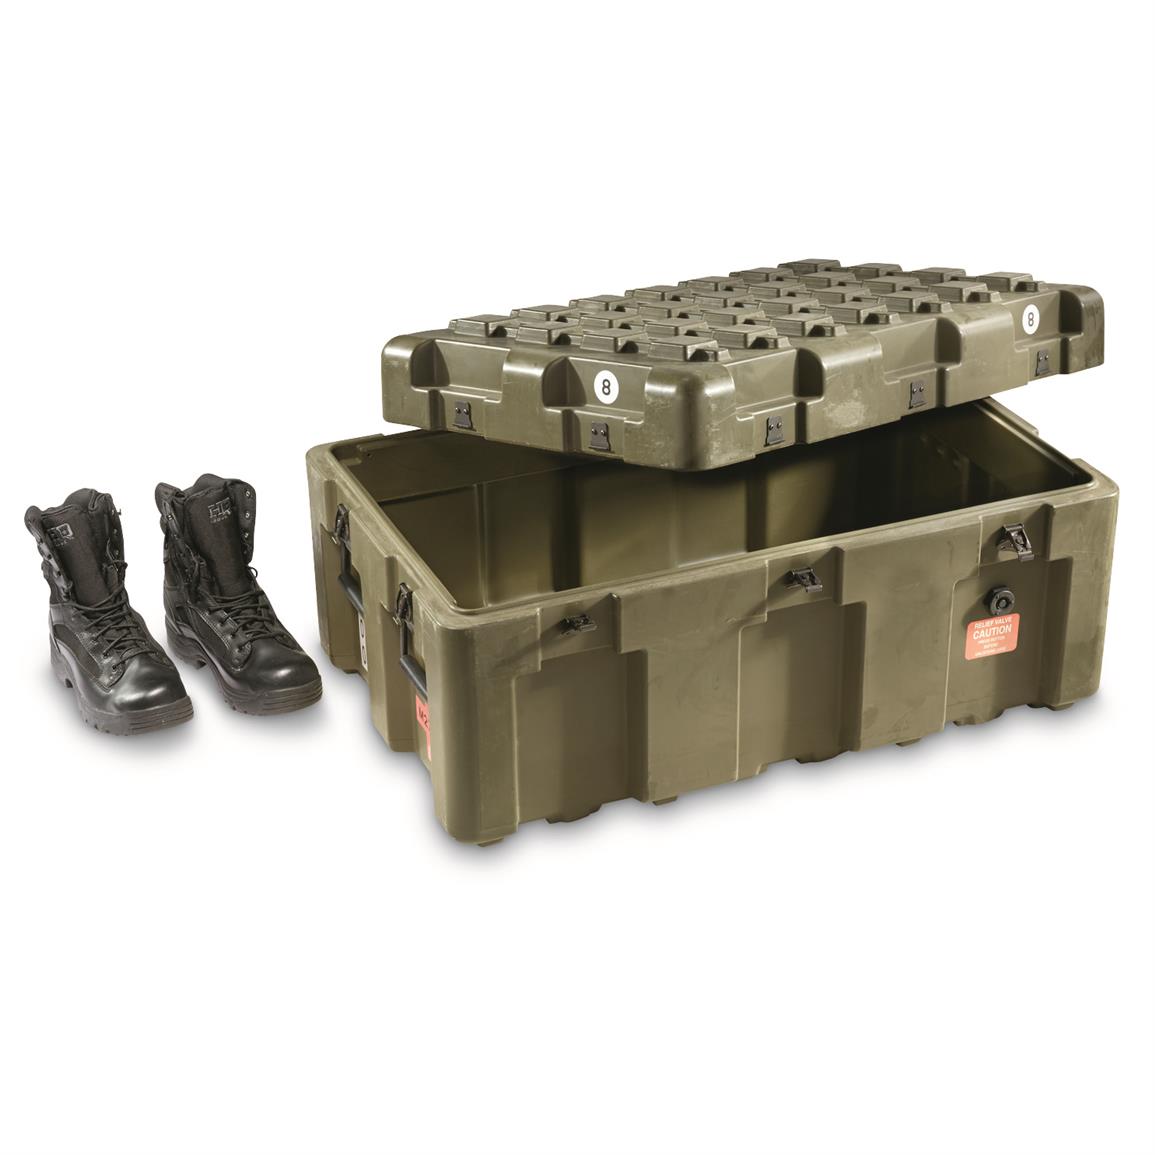 U.s. Military Surplus Hardigg Waterproof Shipping Container, Like New -  672736, Storage Containers At Sportsman's Guide